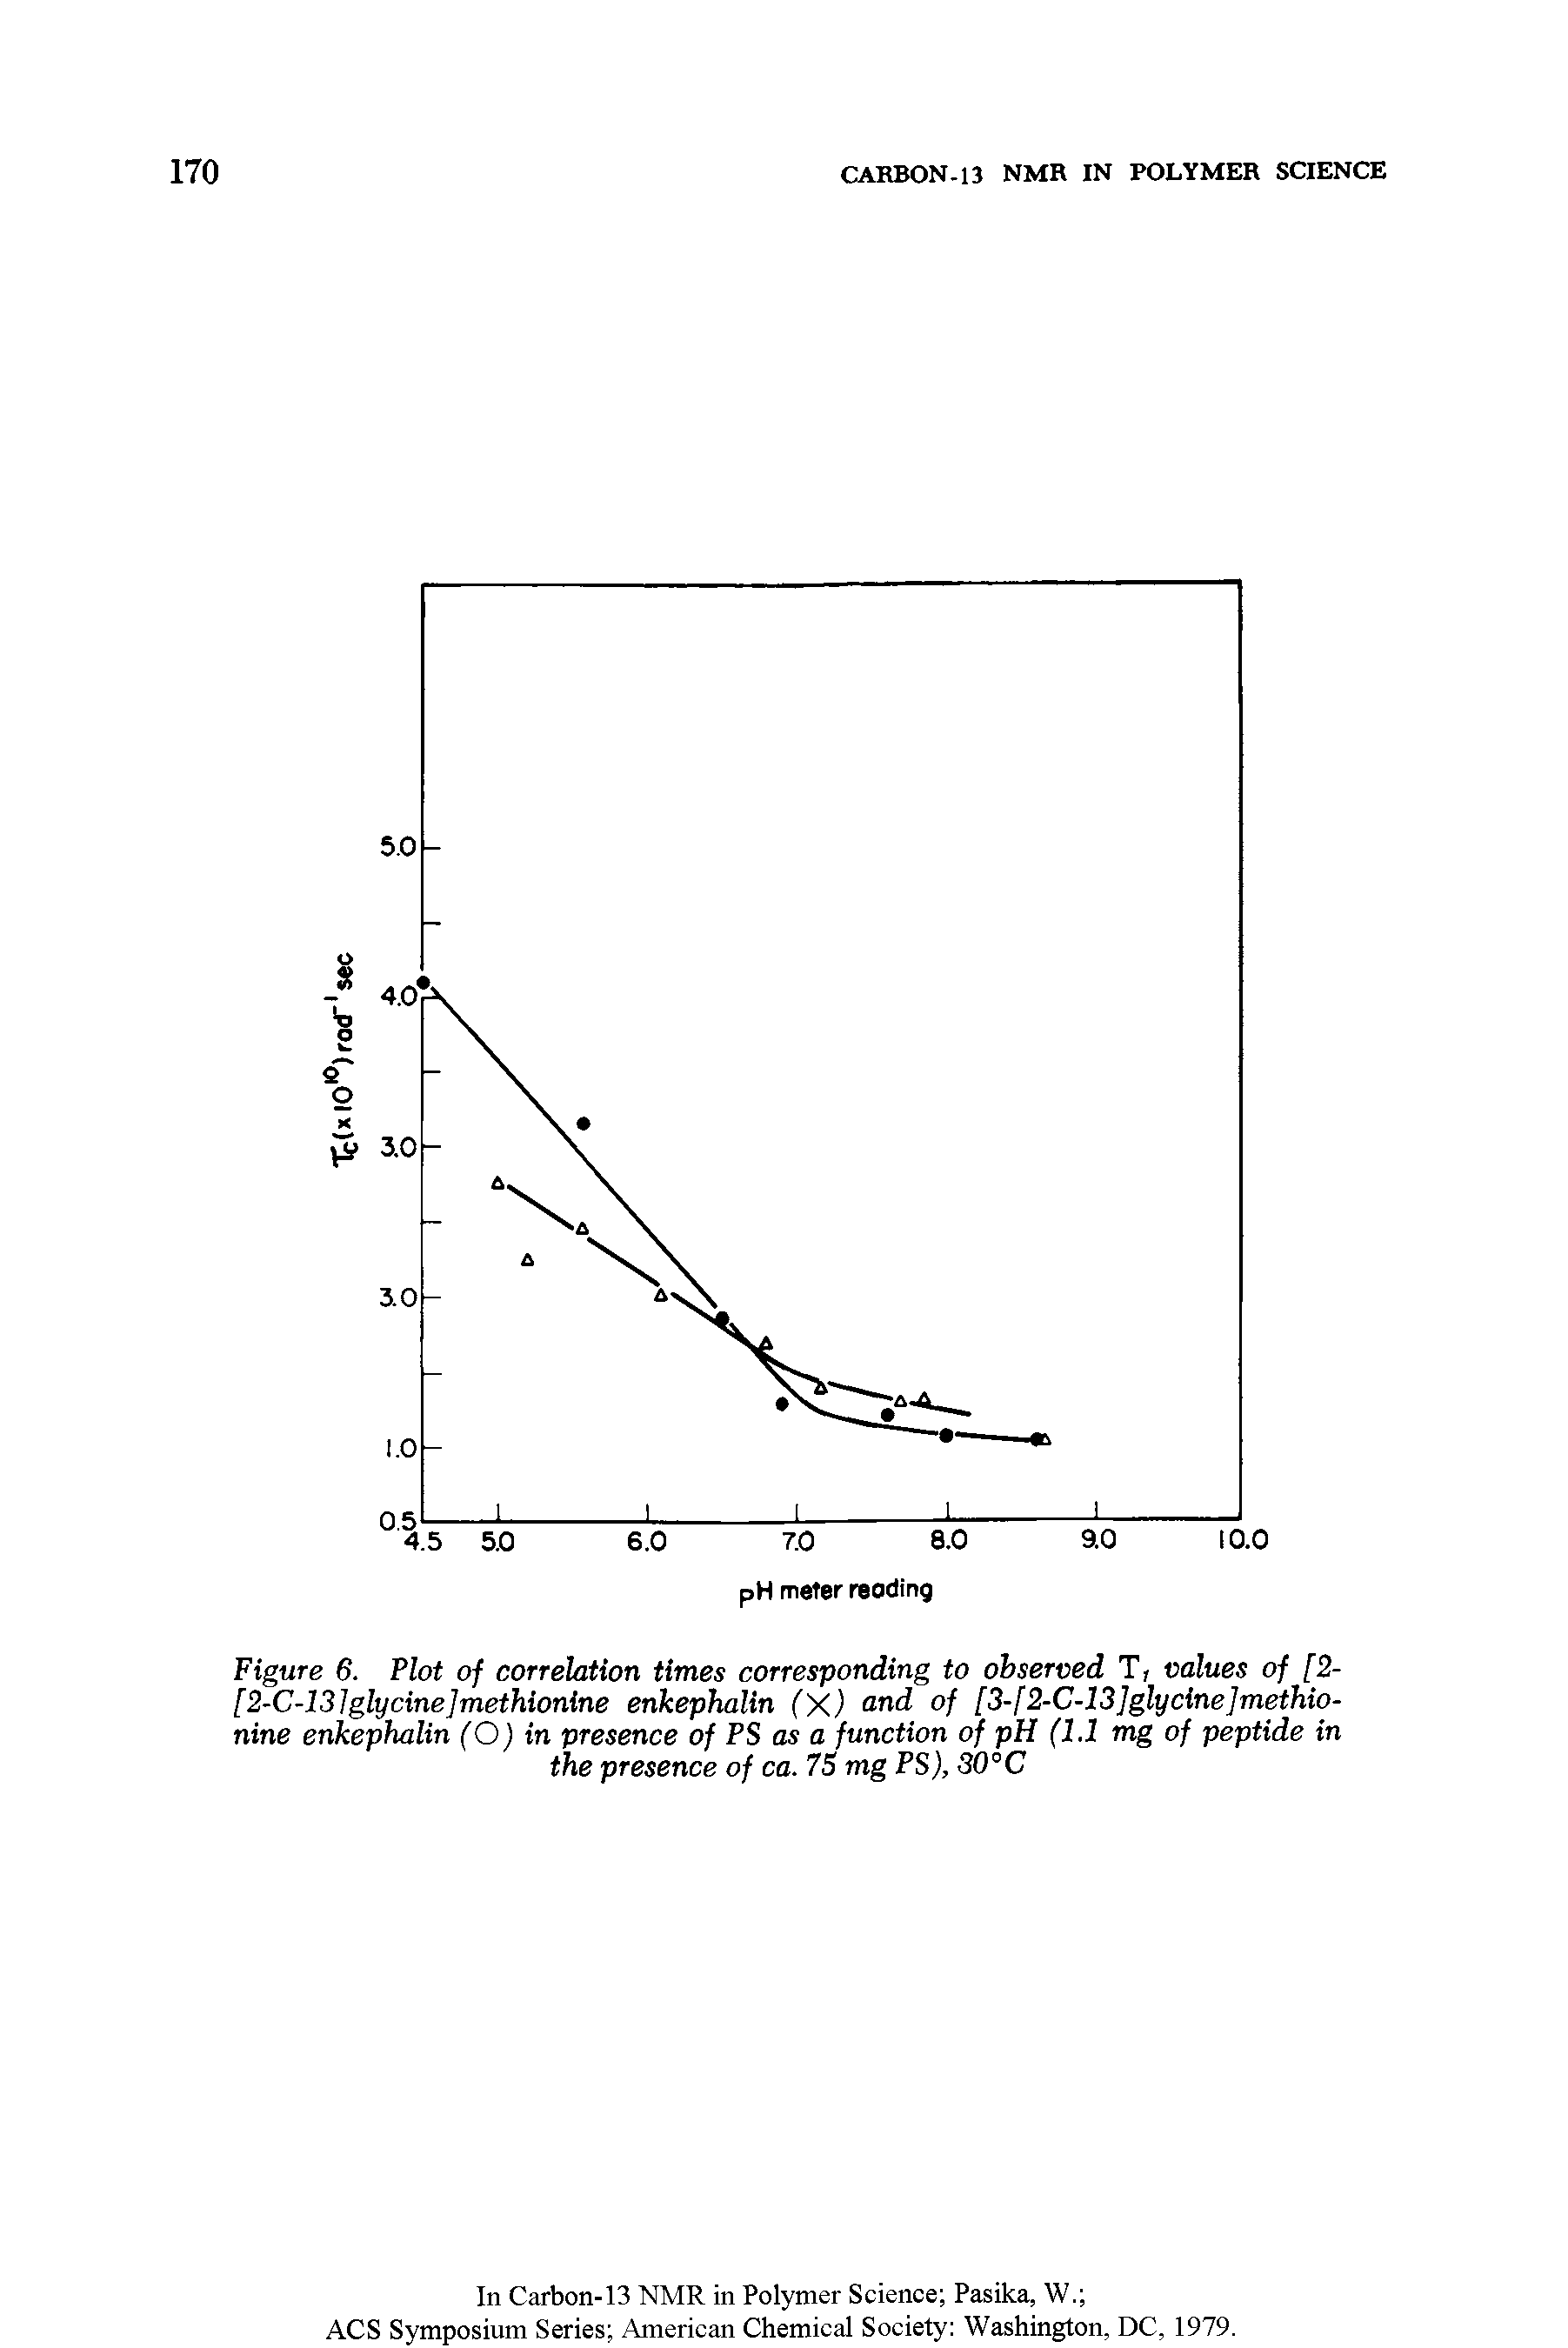 Figure 6. Plot of correlation times corresponding to observed T, values of [2-[2-C-13]glycine]methionine enkephalin (X) and of [3-f2-C-13]glycine]methio-nine enkephalin (O) in presence of PS as a function of pH (1.1 mg of peptide in the presence of ca. 75 mg PS), 30°C...